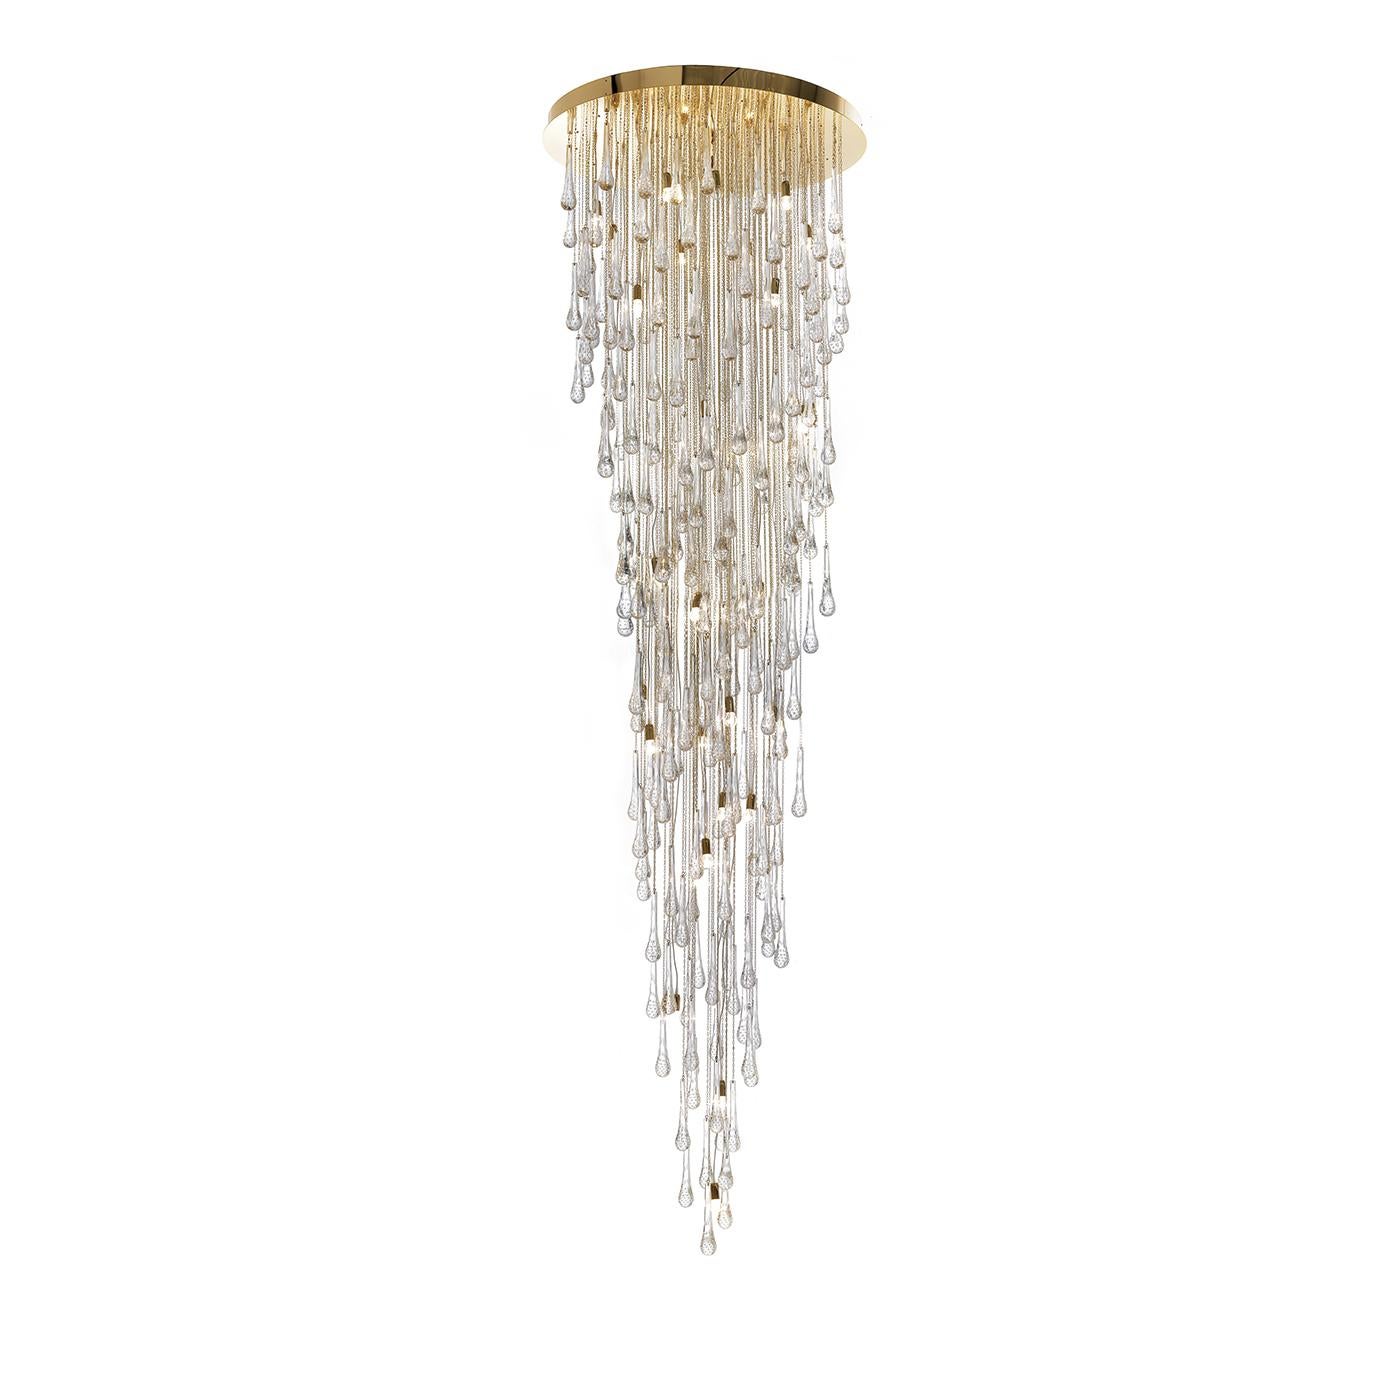 This magnificent chandelier will create a dramatic effect when placed either at the entrance of a house or in any room with a high ceiling. The imposing size of this piece is complemented by an ethereal aesthetic, an effect produced by hundreds of